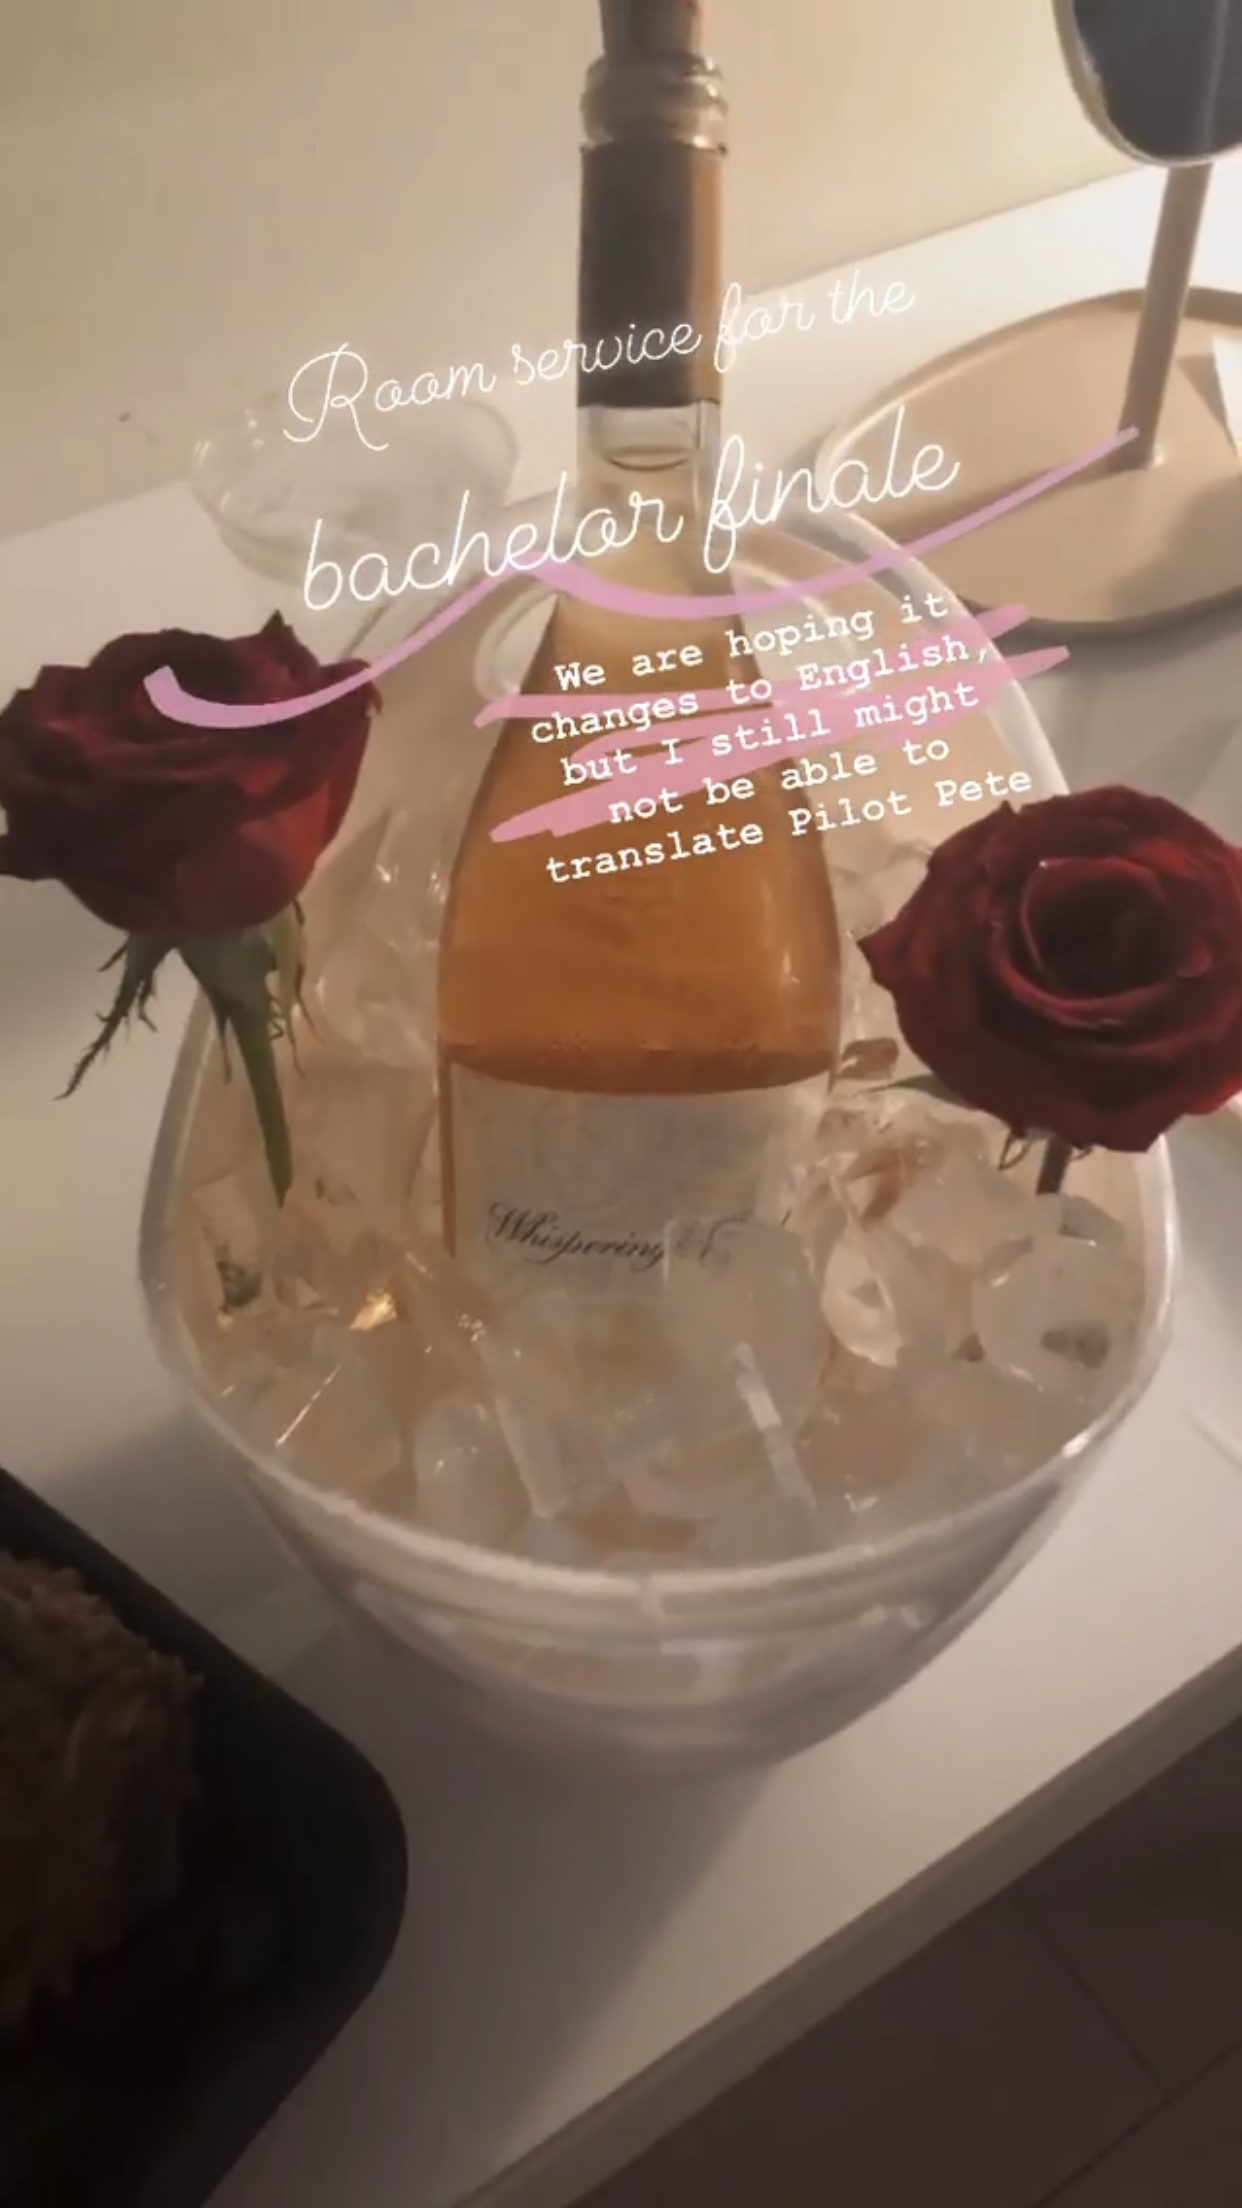 roses room service for the Bachelor finale